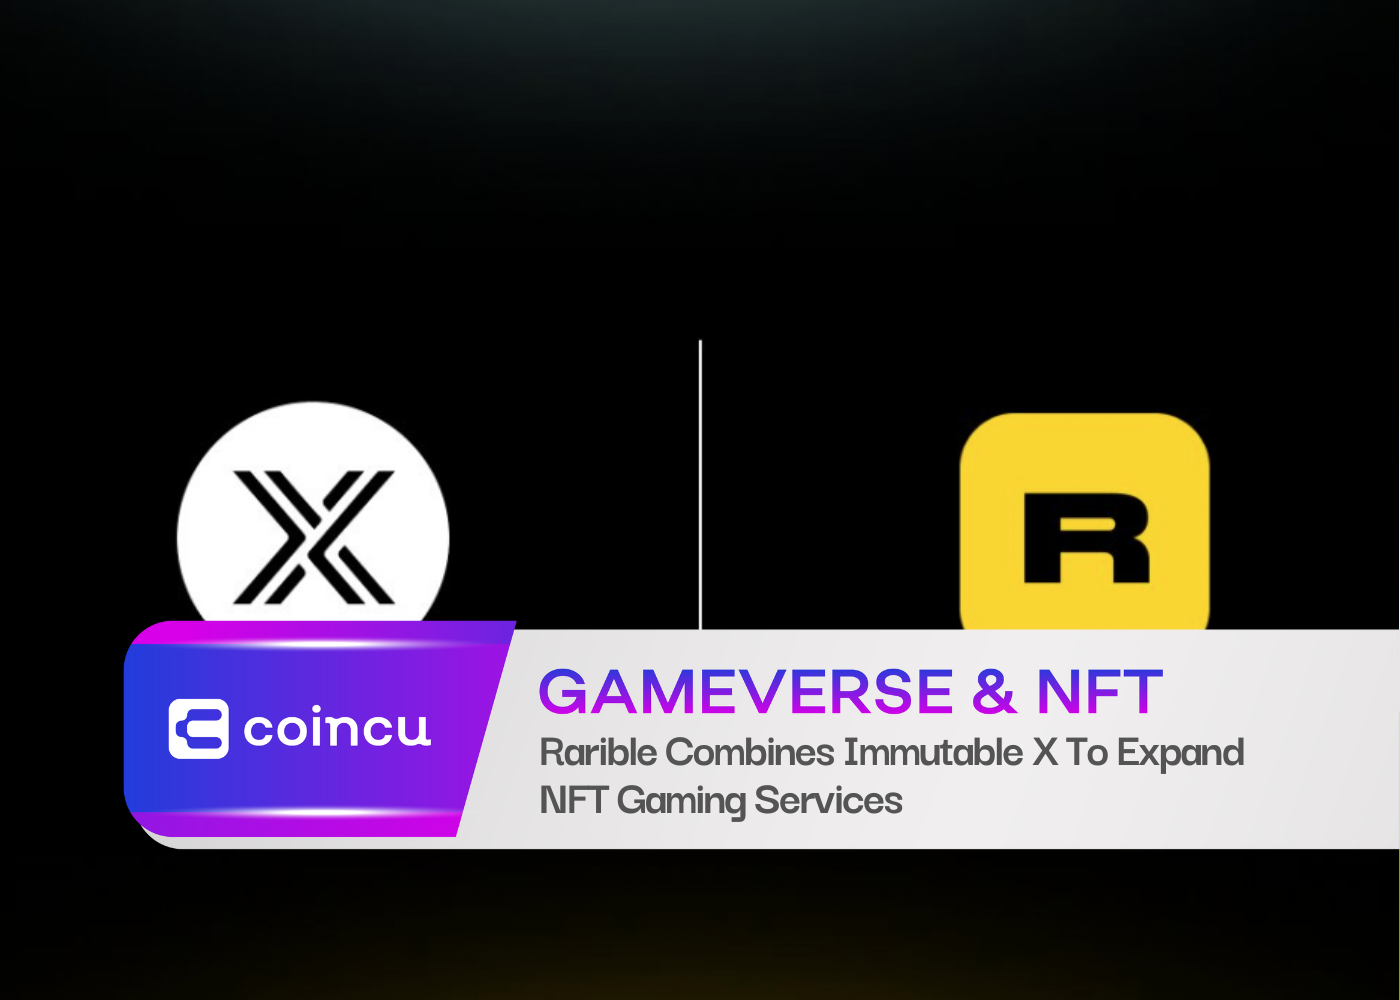 Rarible Combines Immutable X To Expand NFT Gaming Services